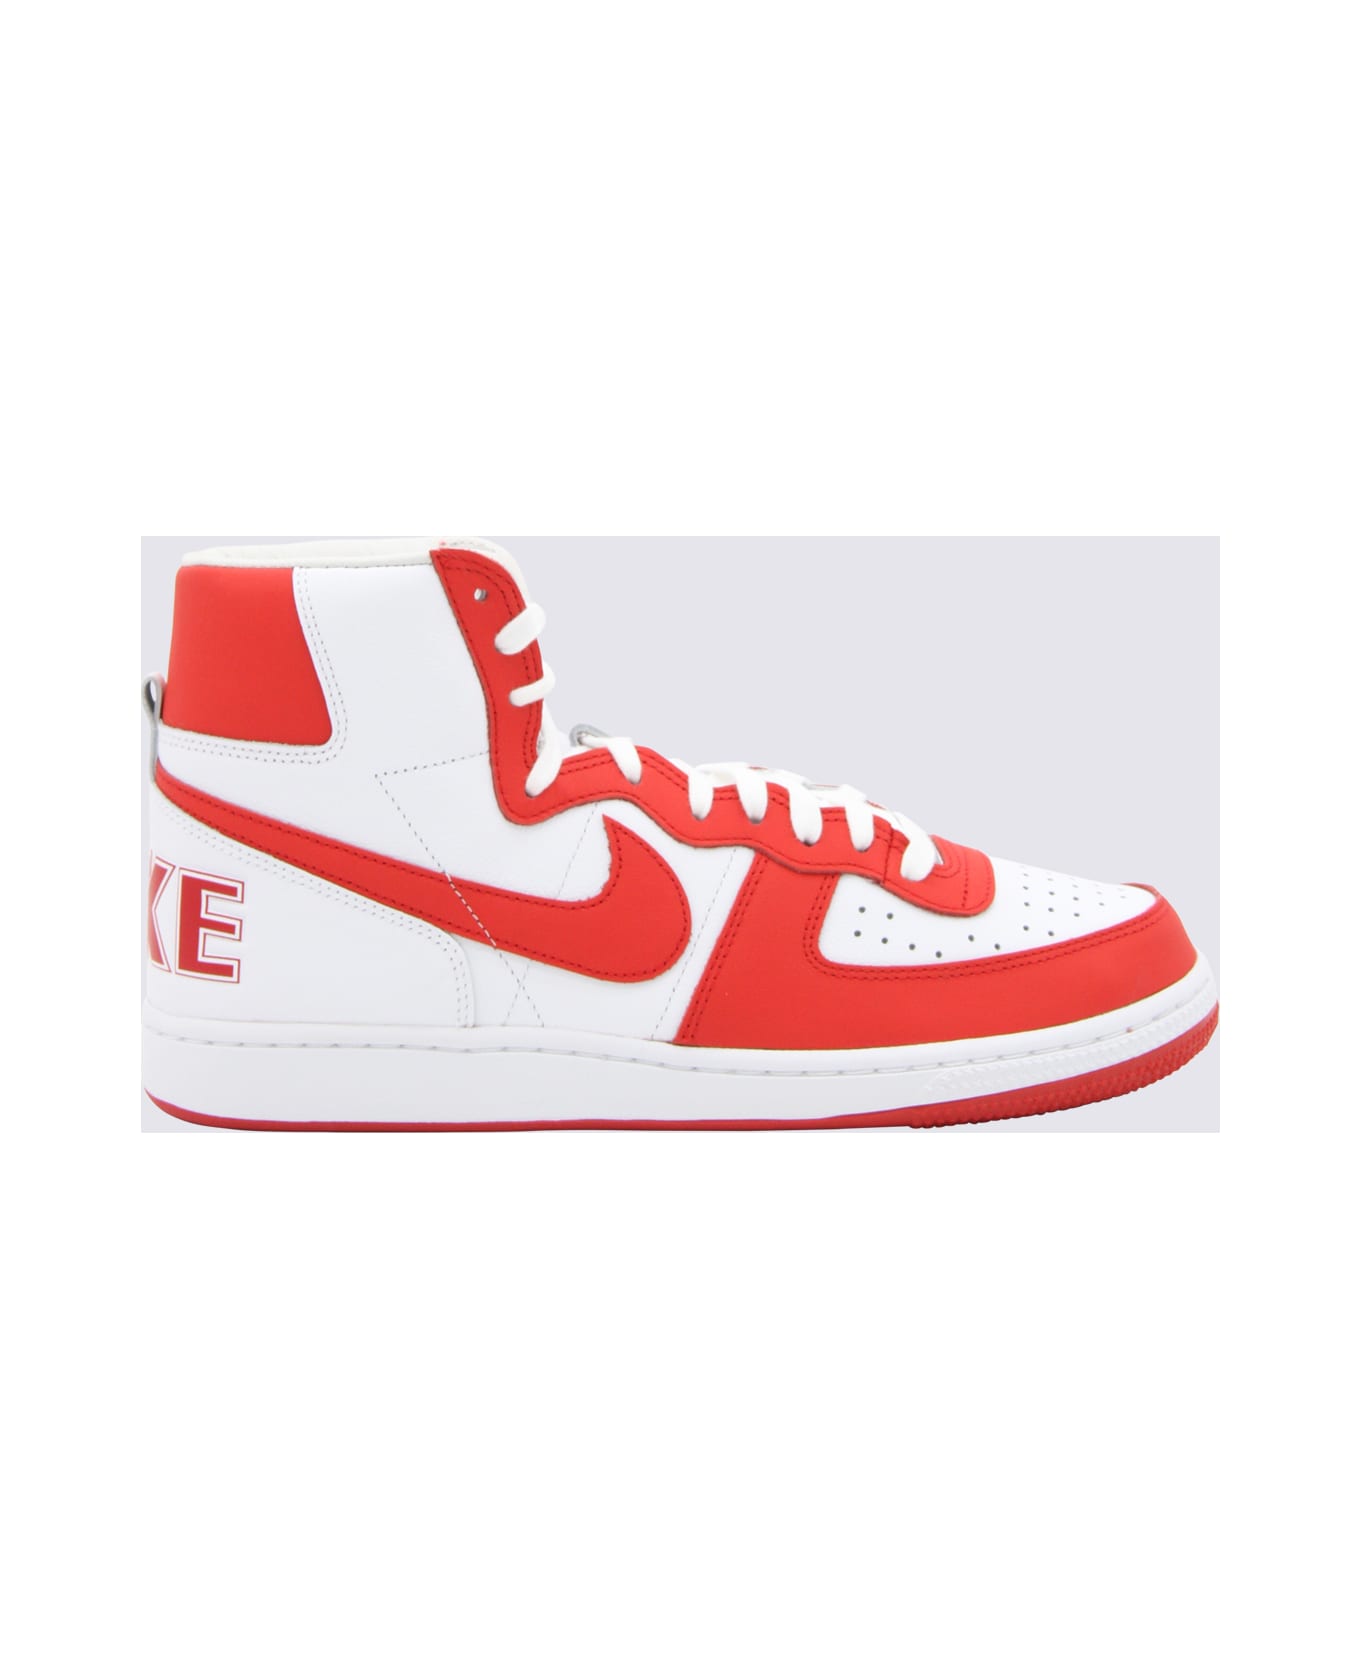 Comme des Garçons White And Red Leather Sneakers - Red